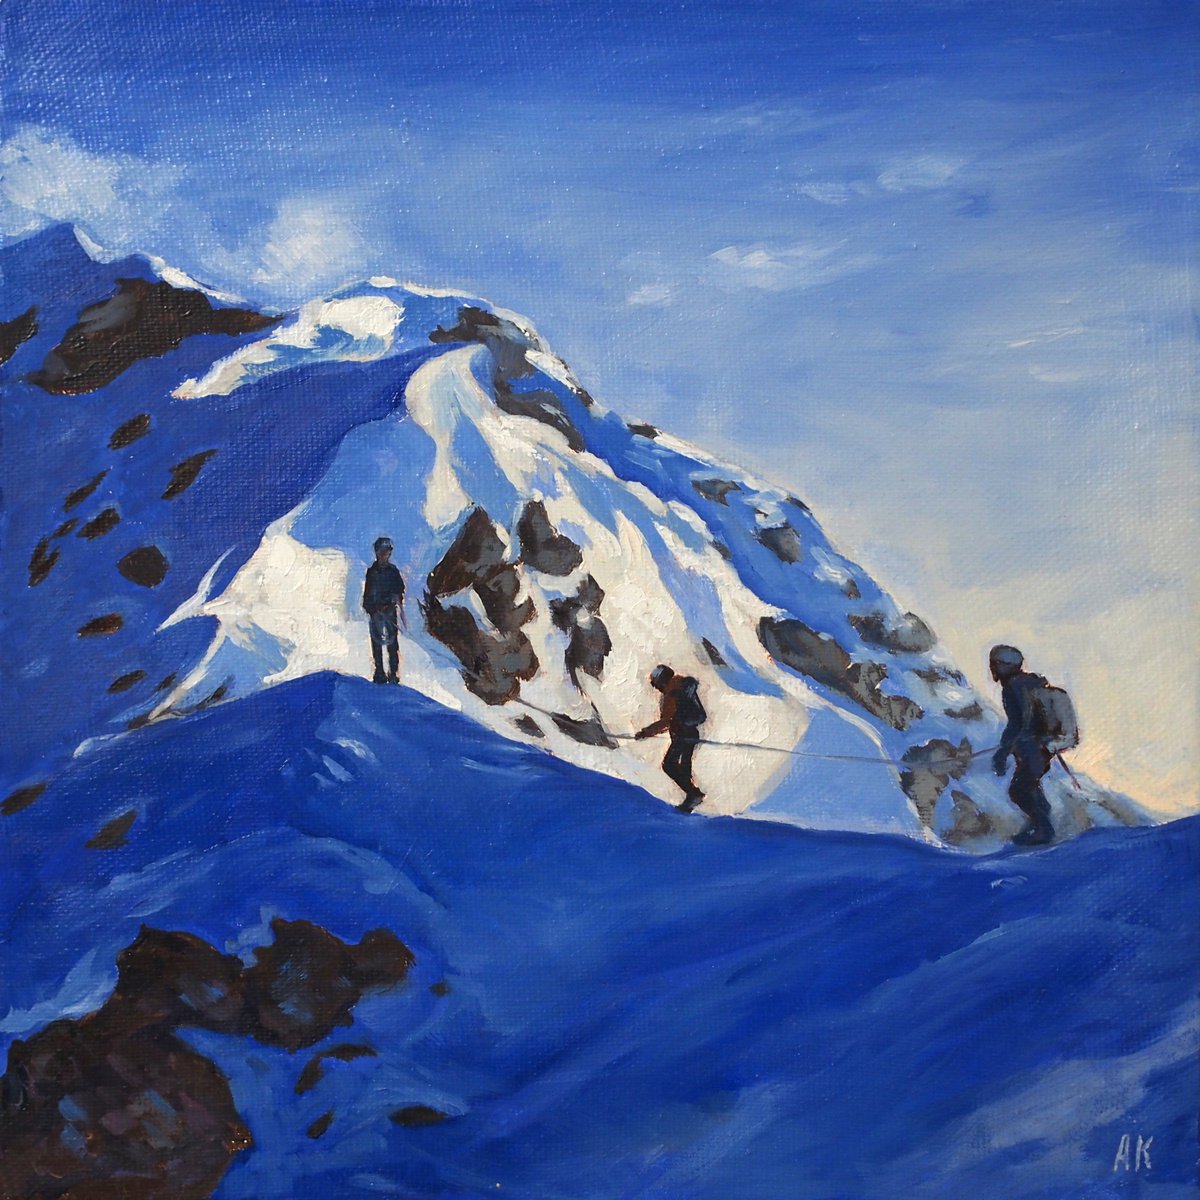 On a mountain trail - NOT FOR SALE - will be available for purchase after May 1, 2022. by Alfia Koral